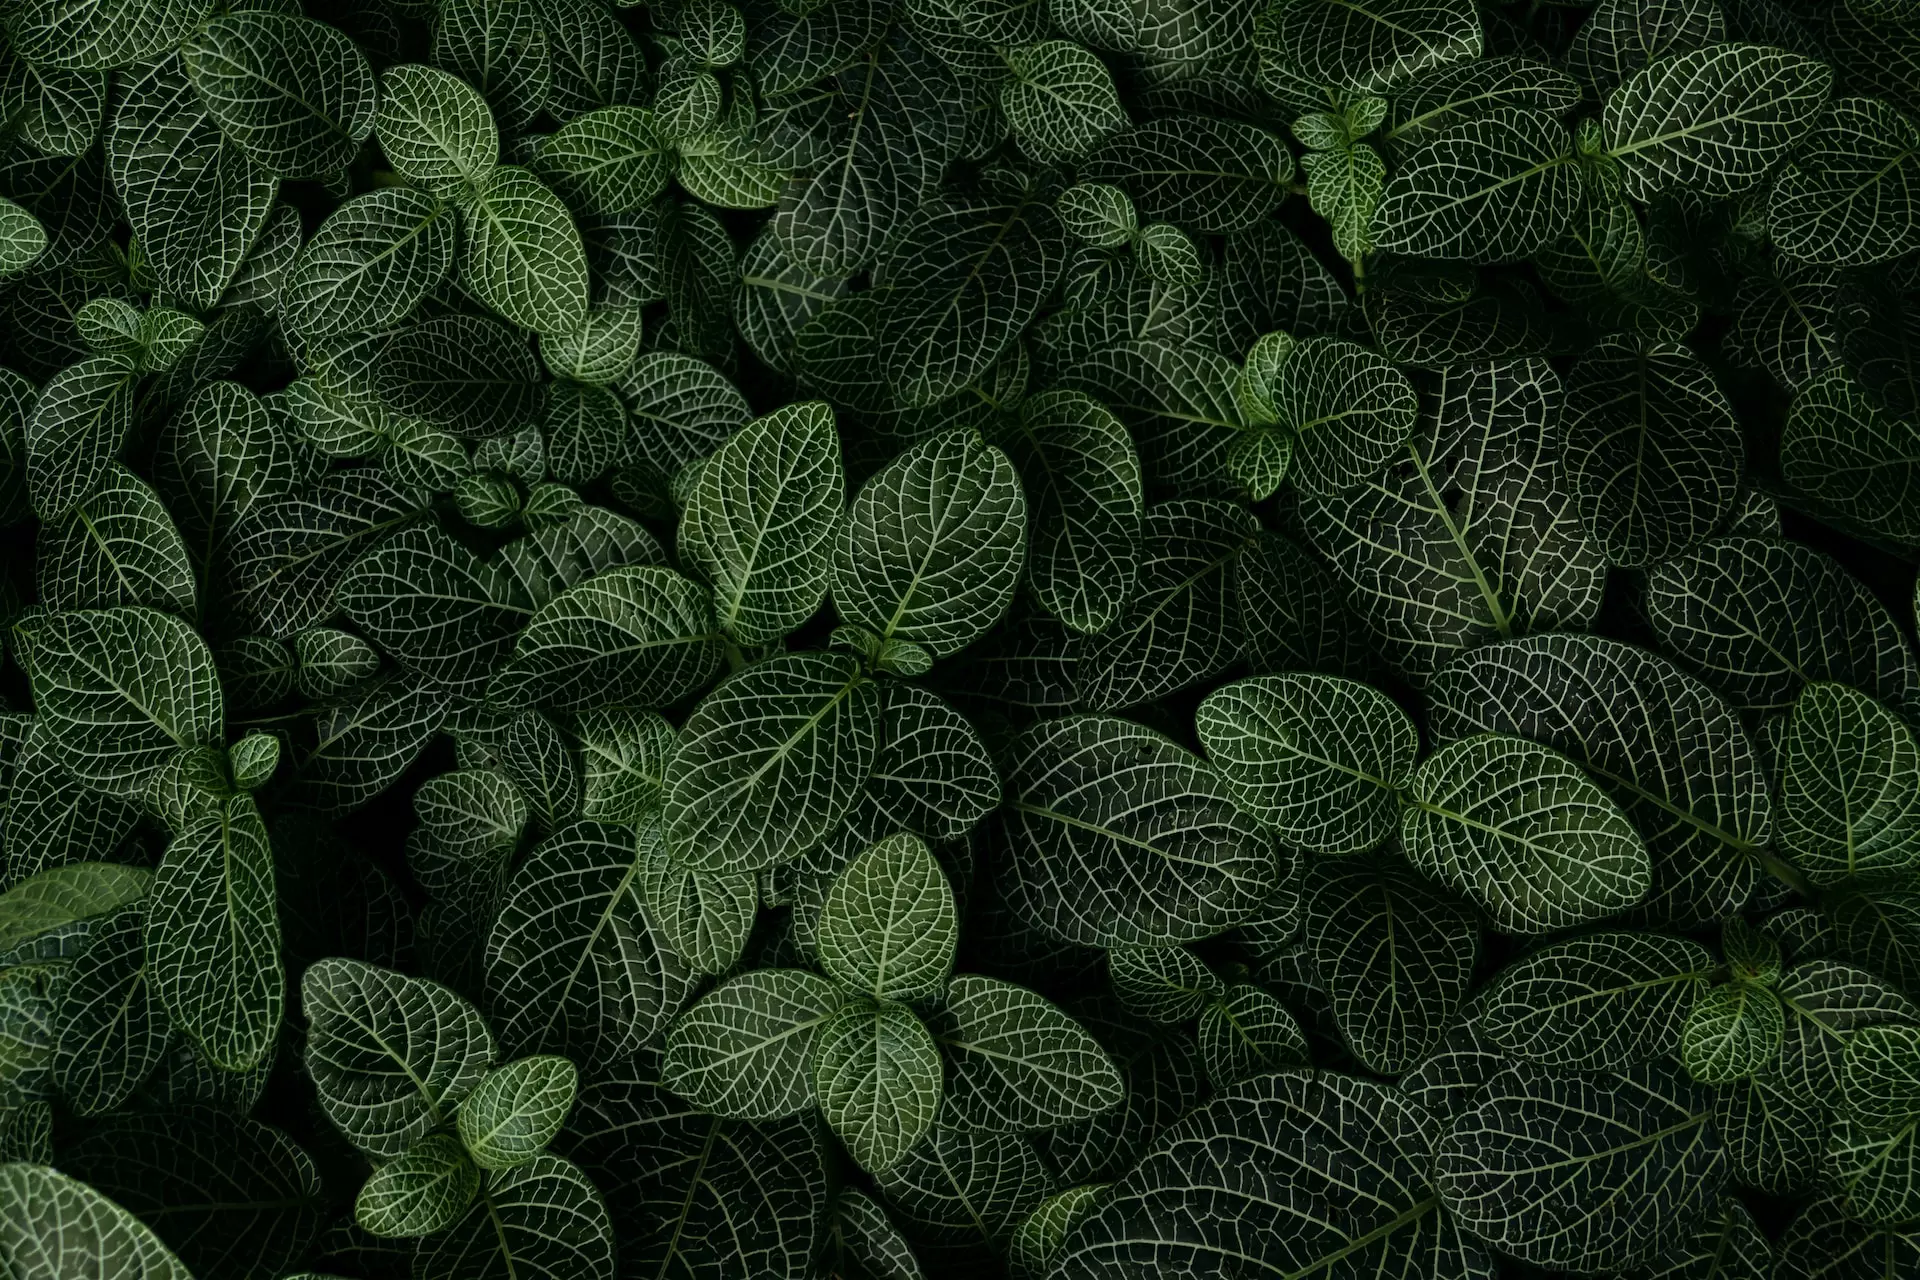 Vibrant green leaves on fittonia plants